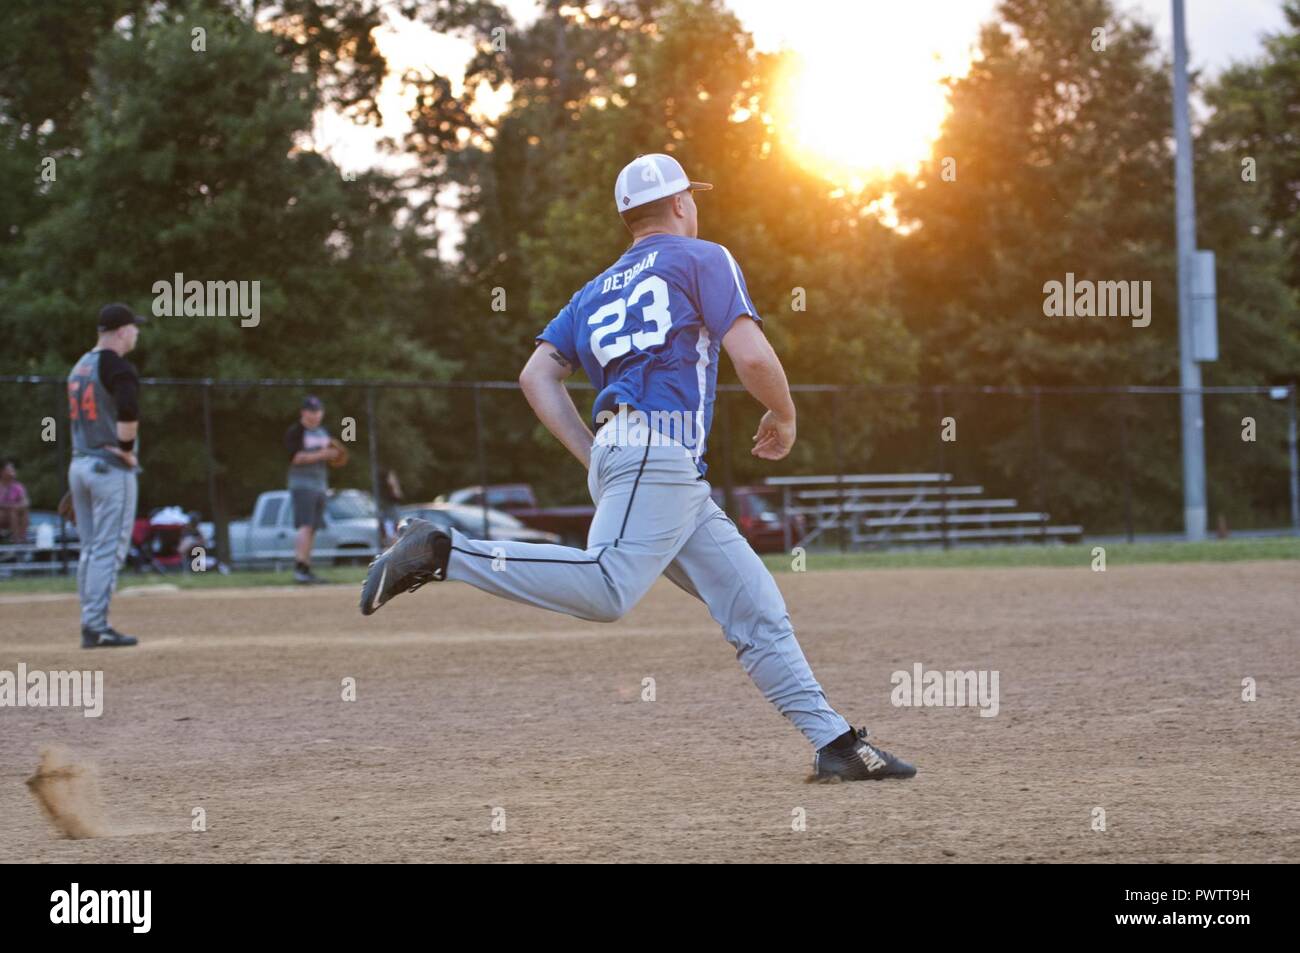 22nd Intelligence Squadron infielder rounds the bases during an Intramural Softball game against the 94th Intelligence Squadron, June 21, 2017 at Fort George G. Meade. 22nd IS won by a score of 10-0. Stock Photo